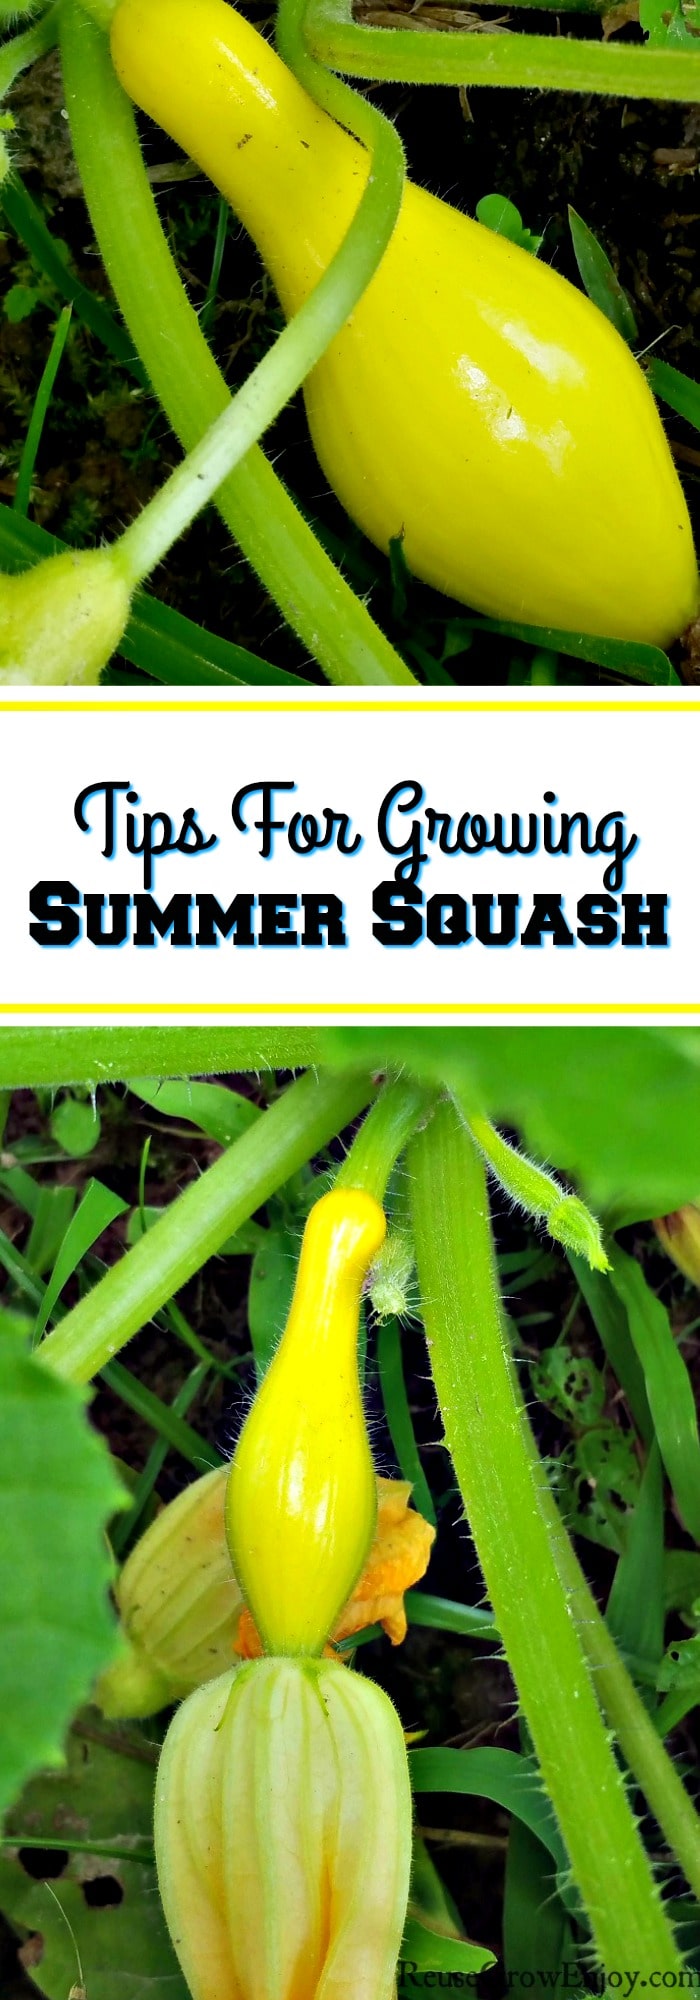 If you will be growing a garden this year and thinking about growing squash, I have some tips to share with you. Check out these Tips For Growing Summer Squash! This is always one of my must haves in the garden!